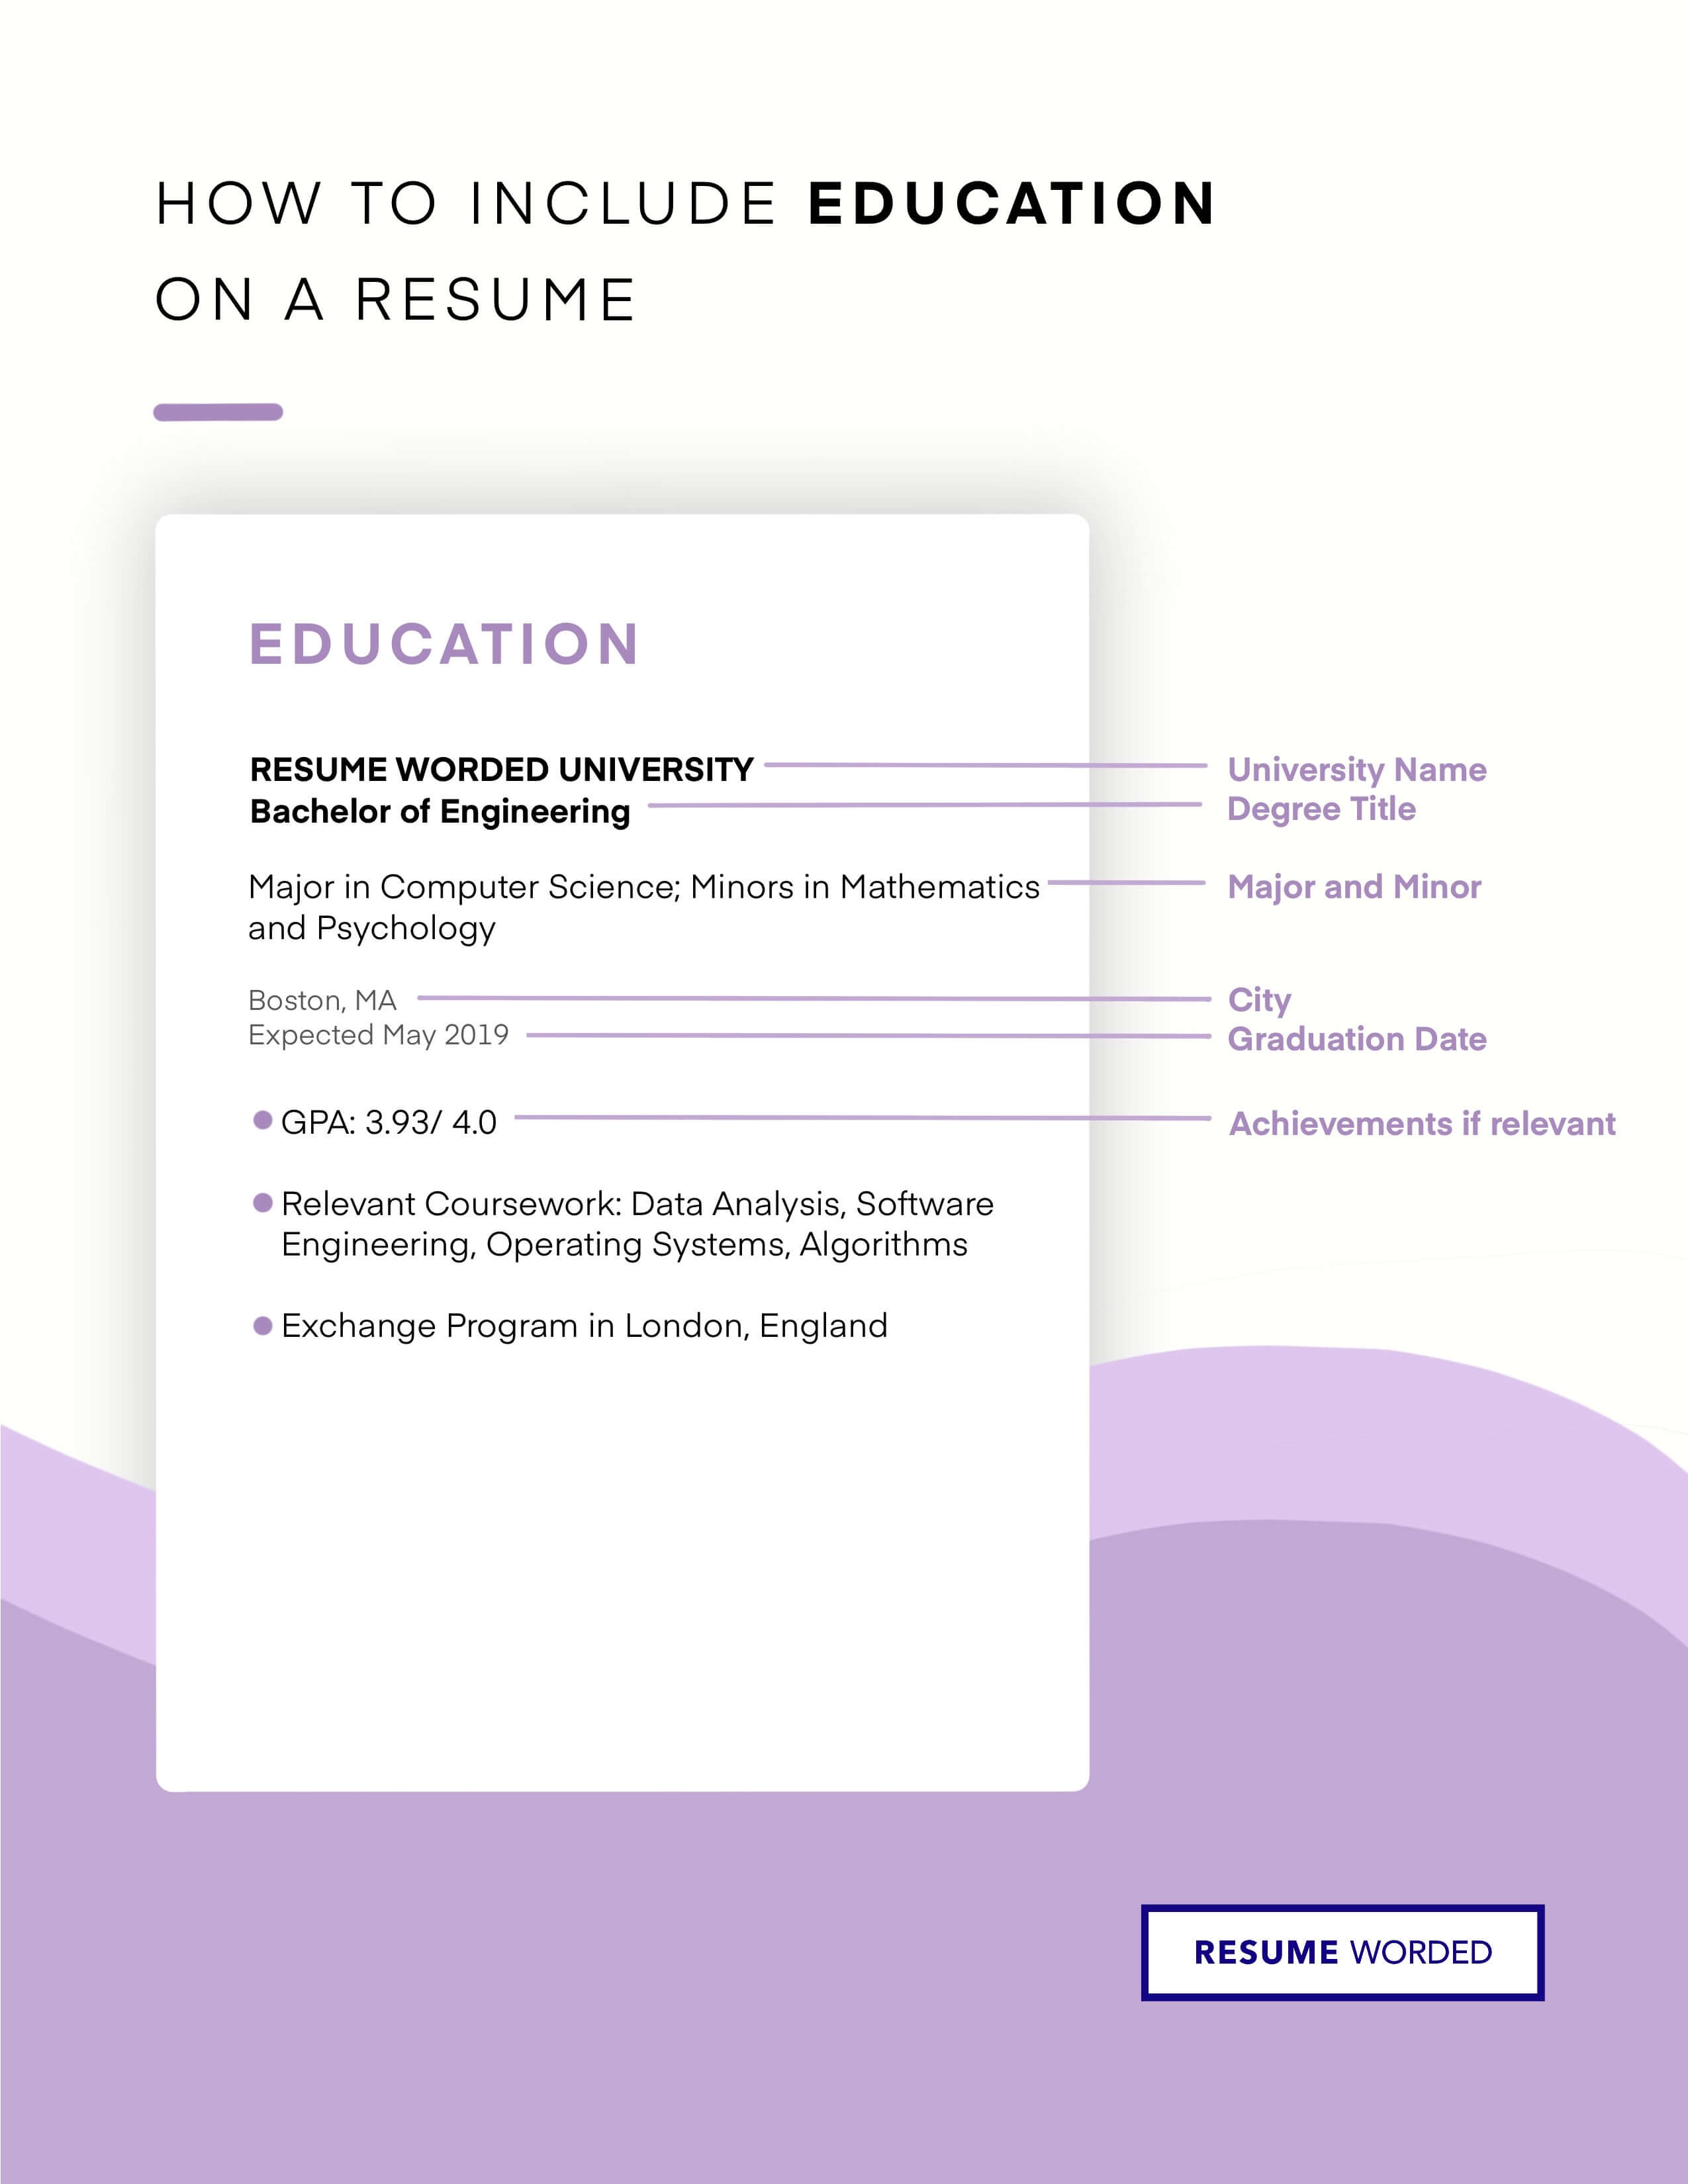 Ensure you have the required licenses and certifications. - Plant Operator Resume